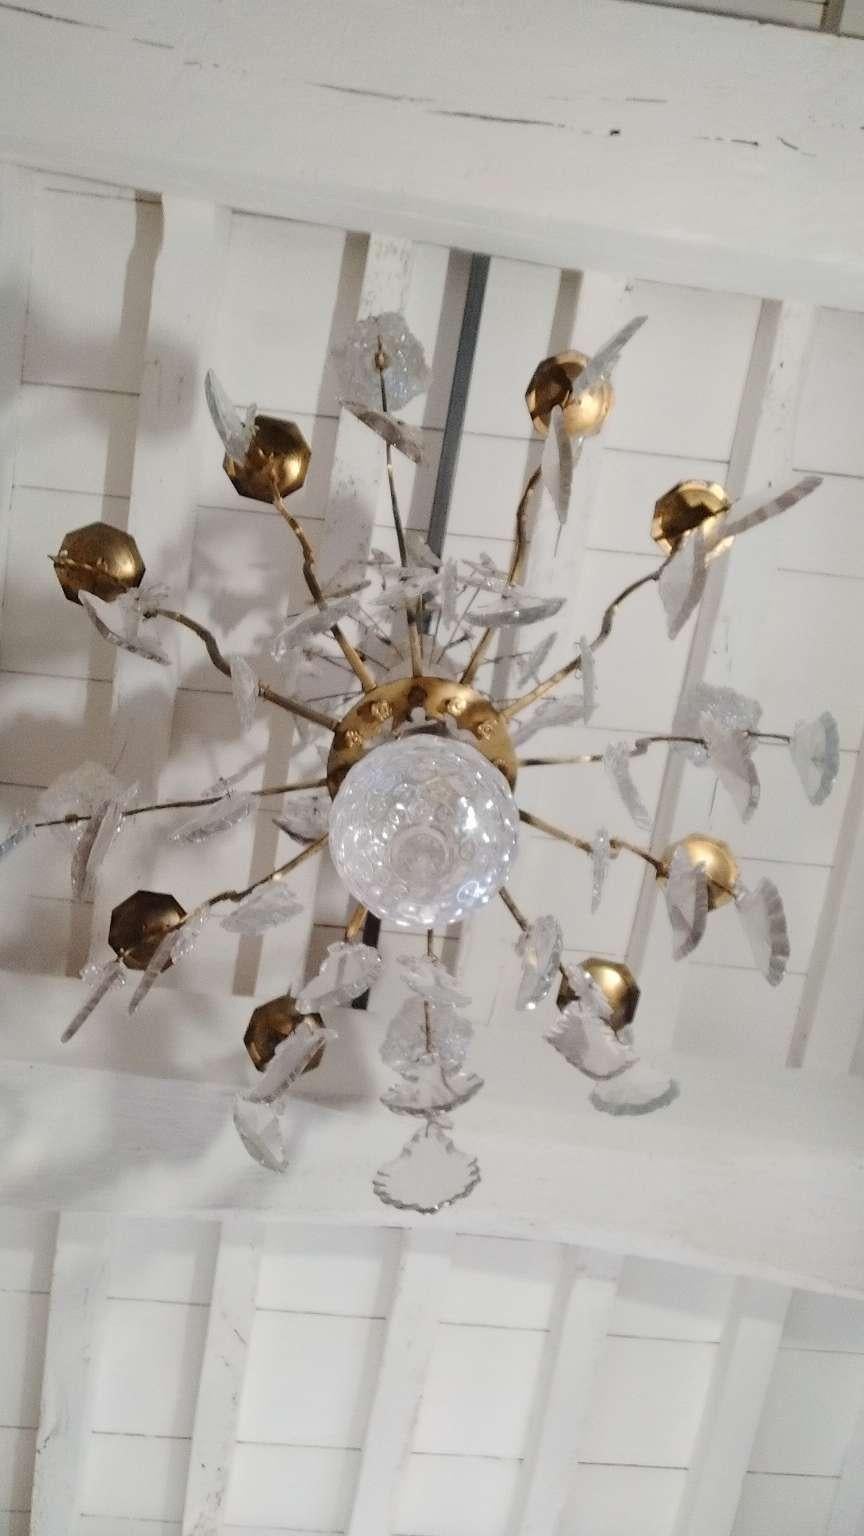 This 19th century crystal and brass chandelier of a large size comes from a church in the south of France. It was made circa 1820. It has height exterior lights, large shaped crystals and four crystal daggers as well as a large cut-glass ball. Note